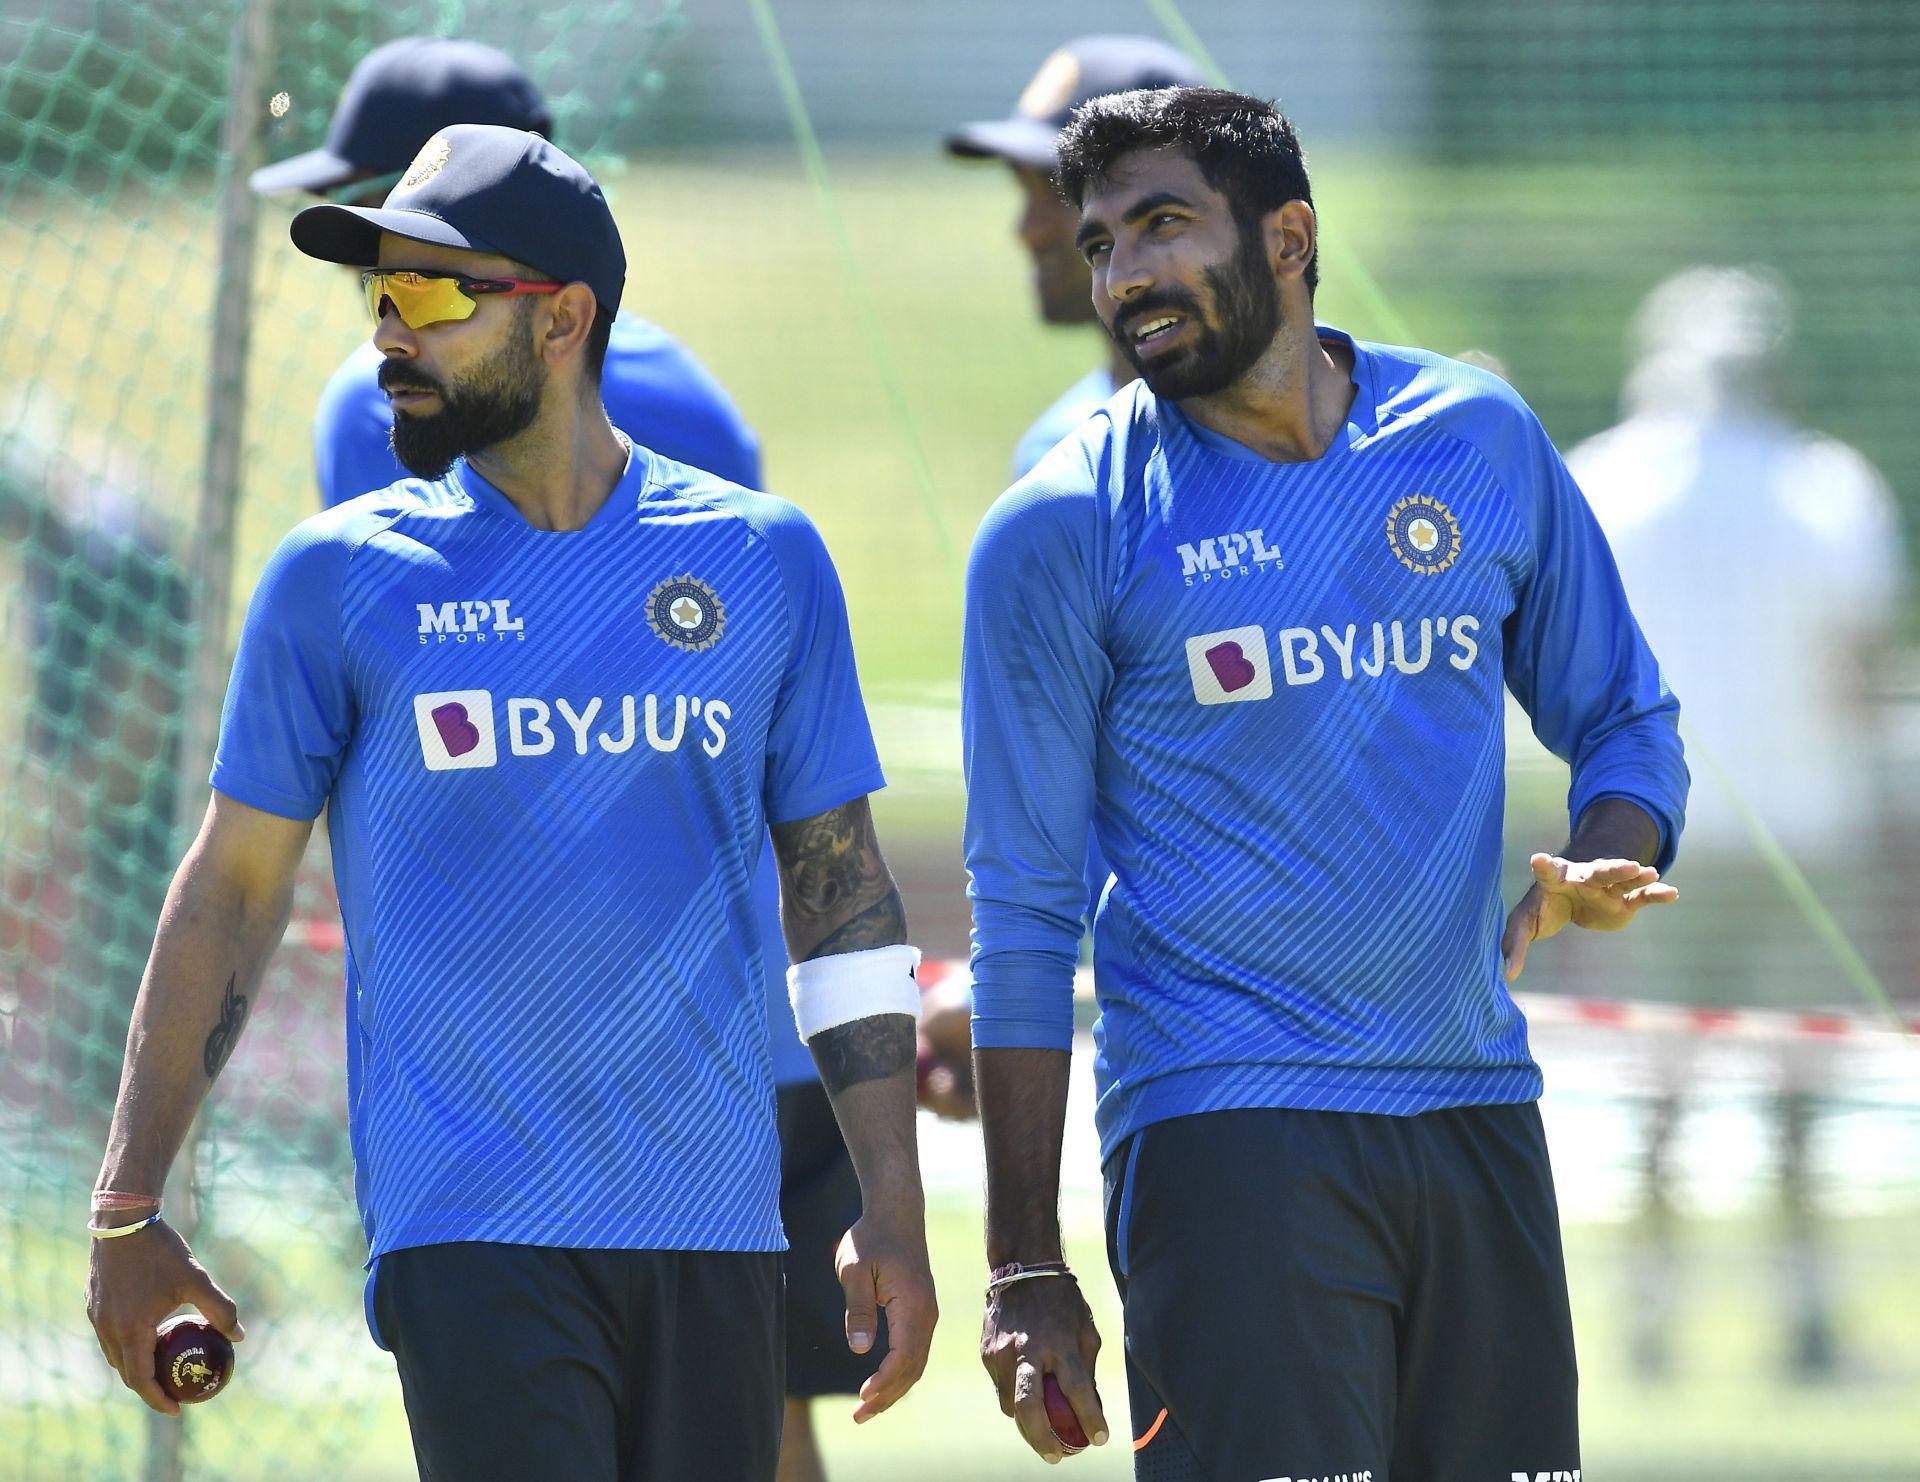 Virat Kohli and Jasprit Bumrah have been rested for the T20I series against South Africa.